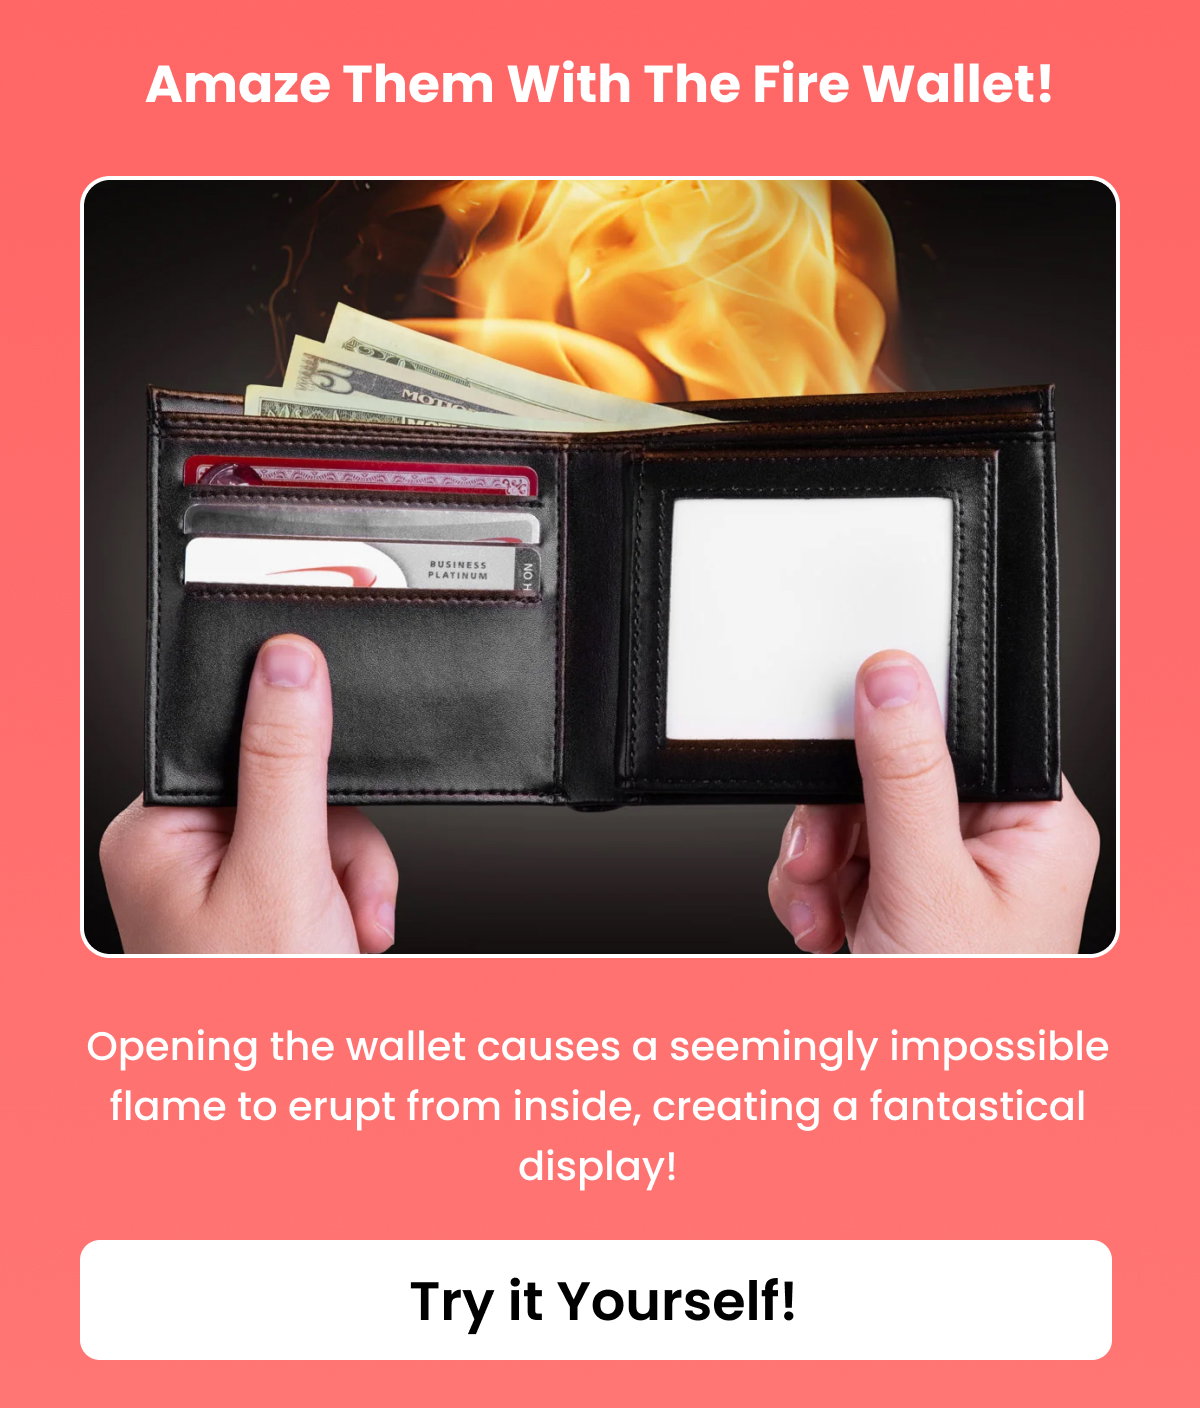 Amaze them with the fire wallet!